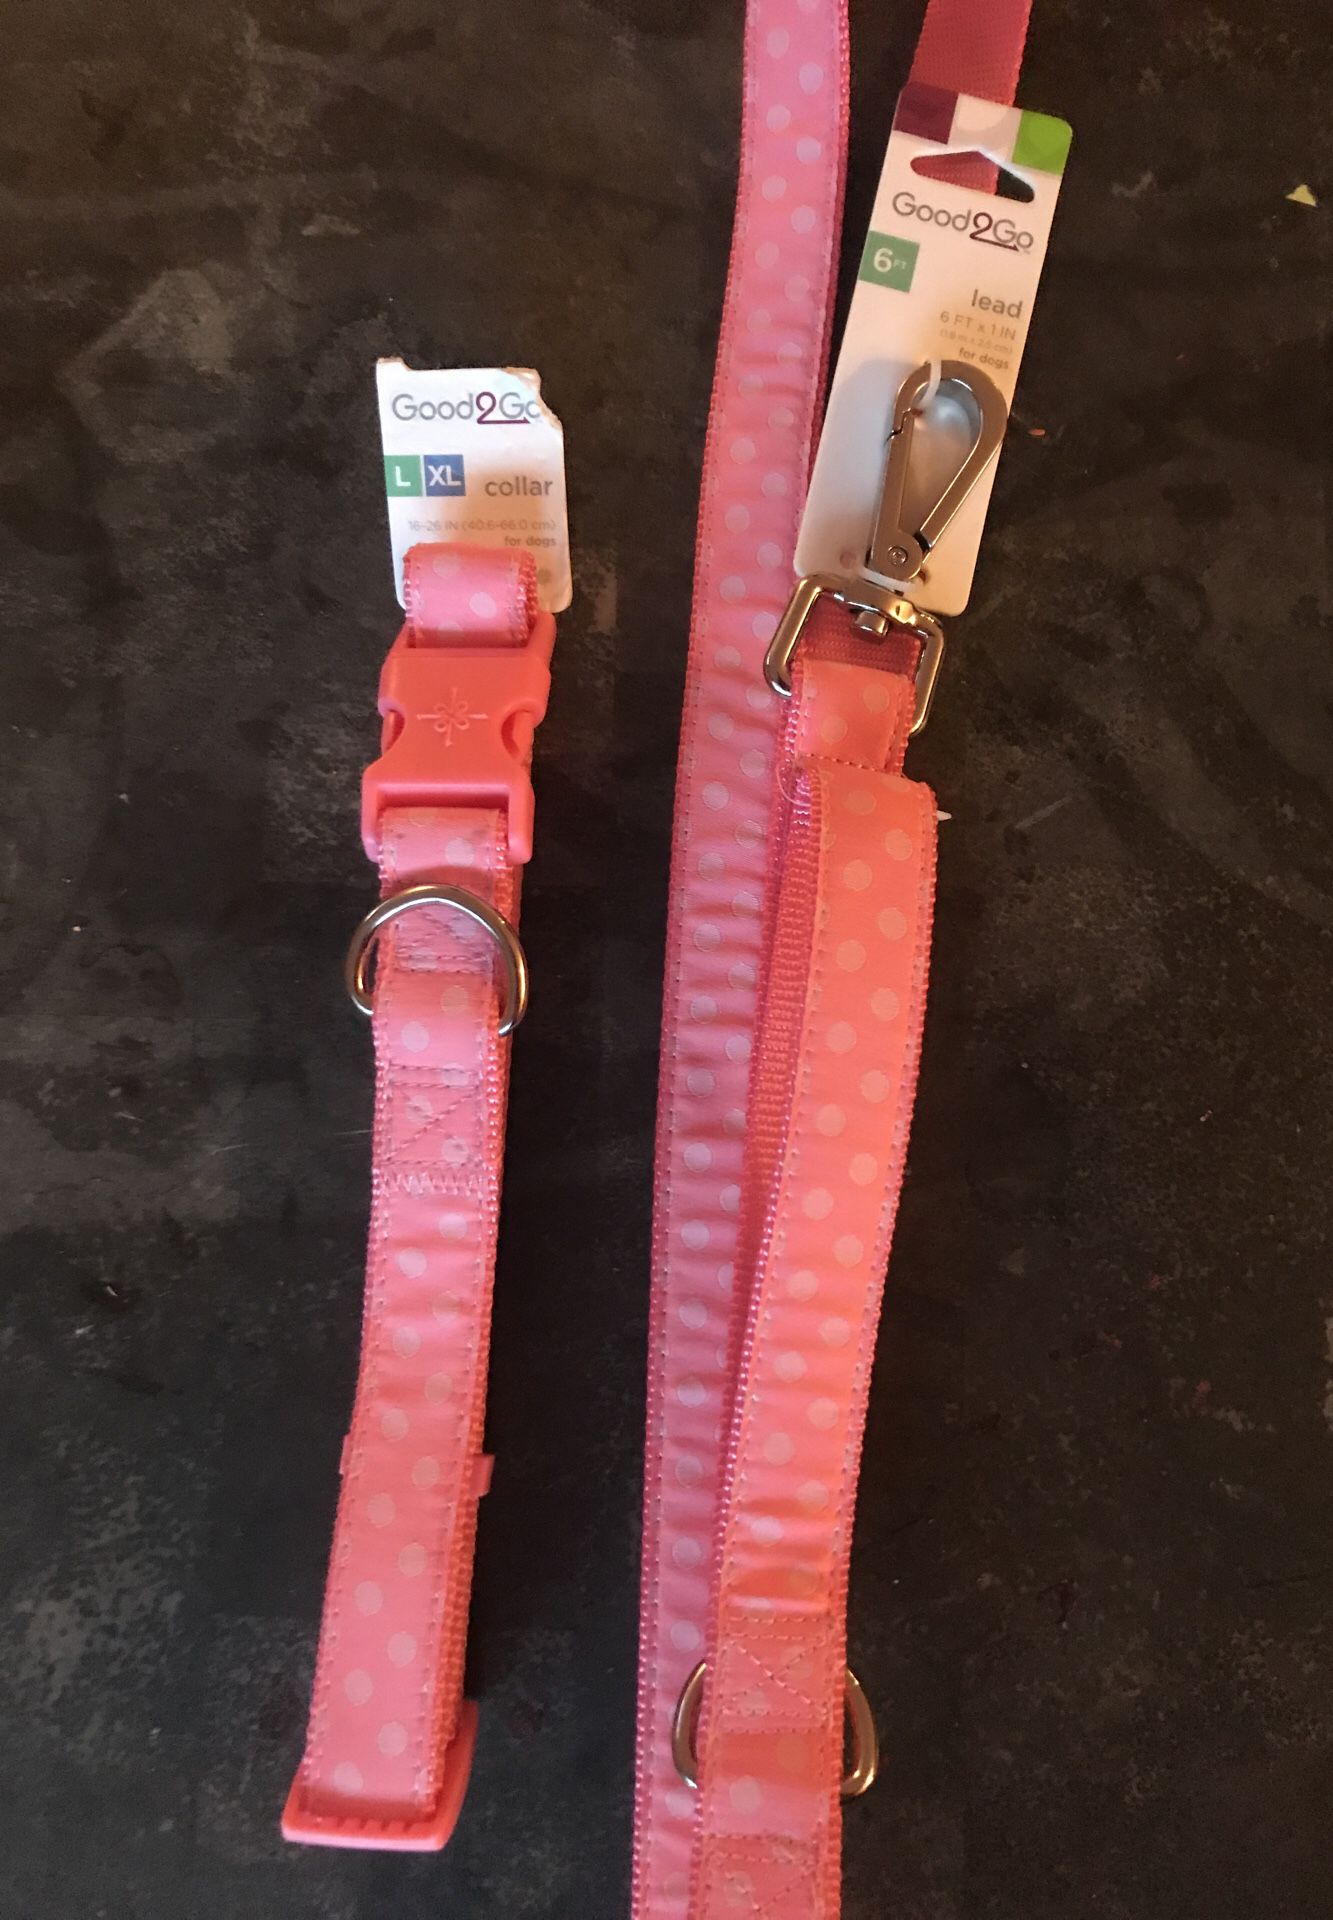 Brandnew pink dog collar with white polka dots and leash